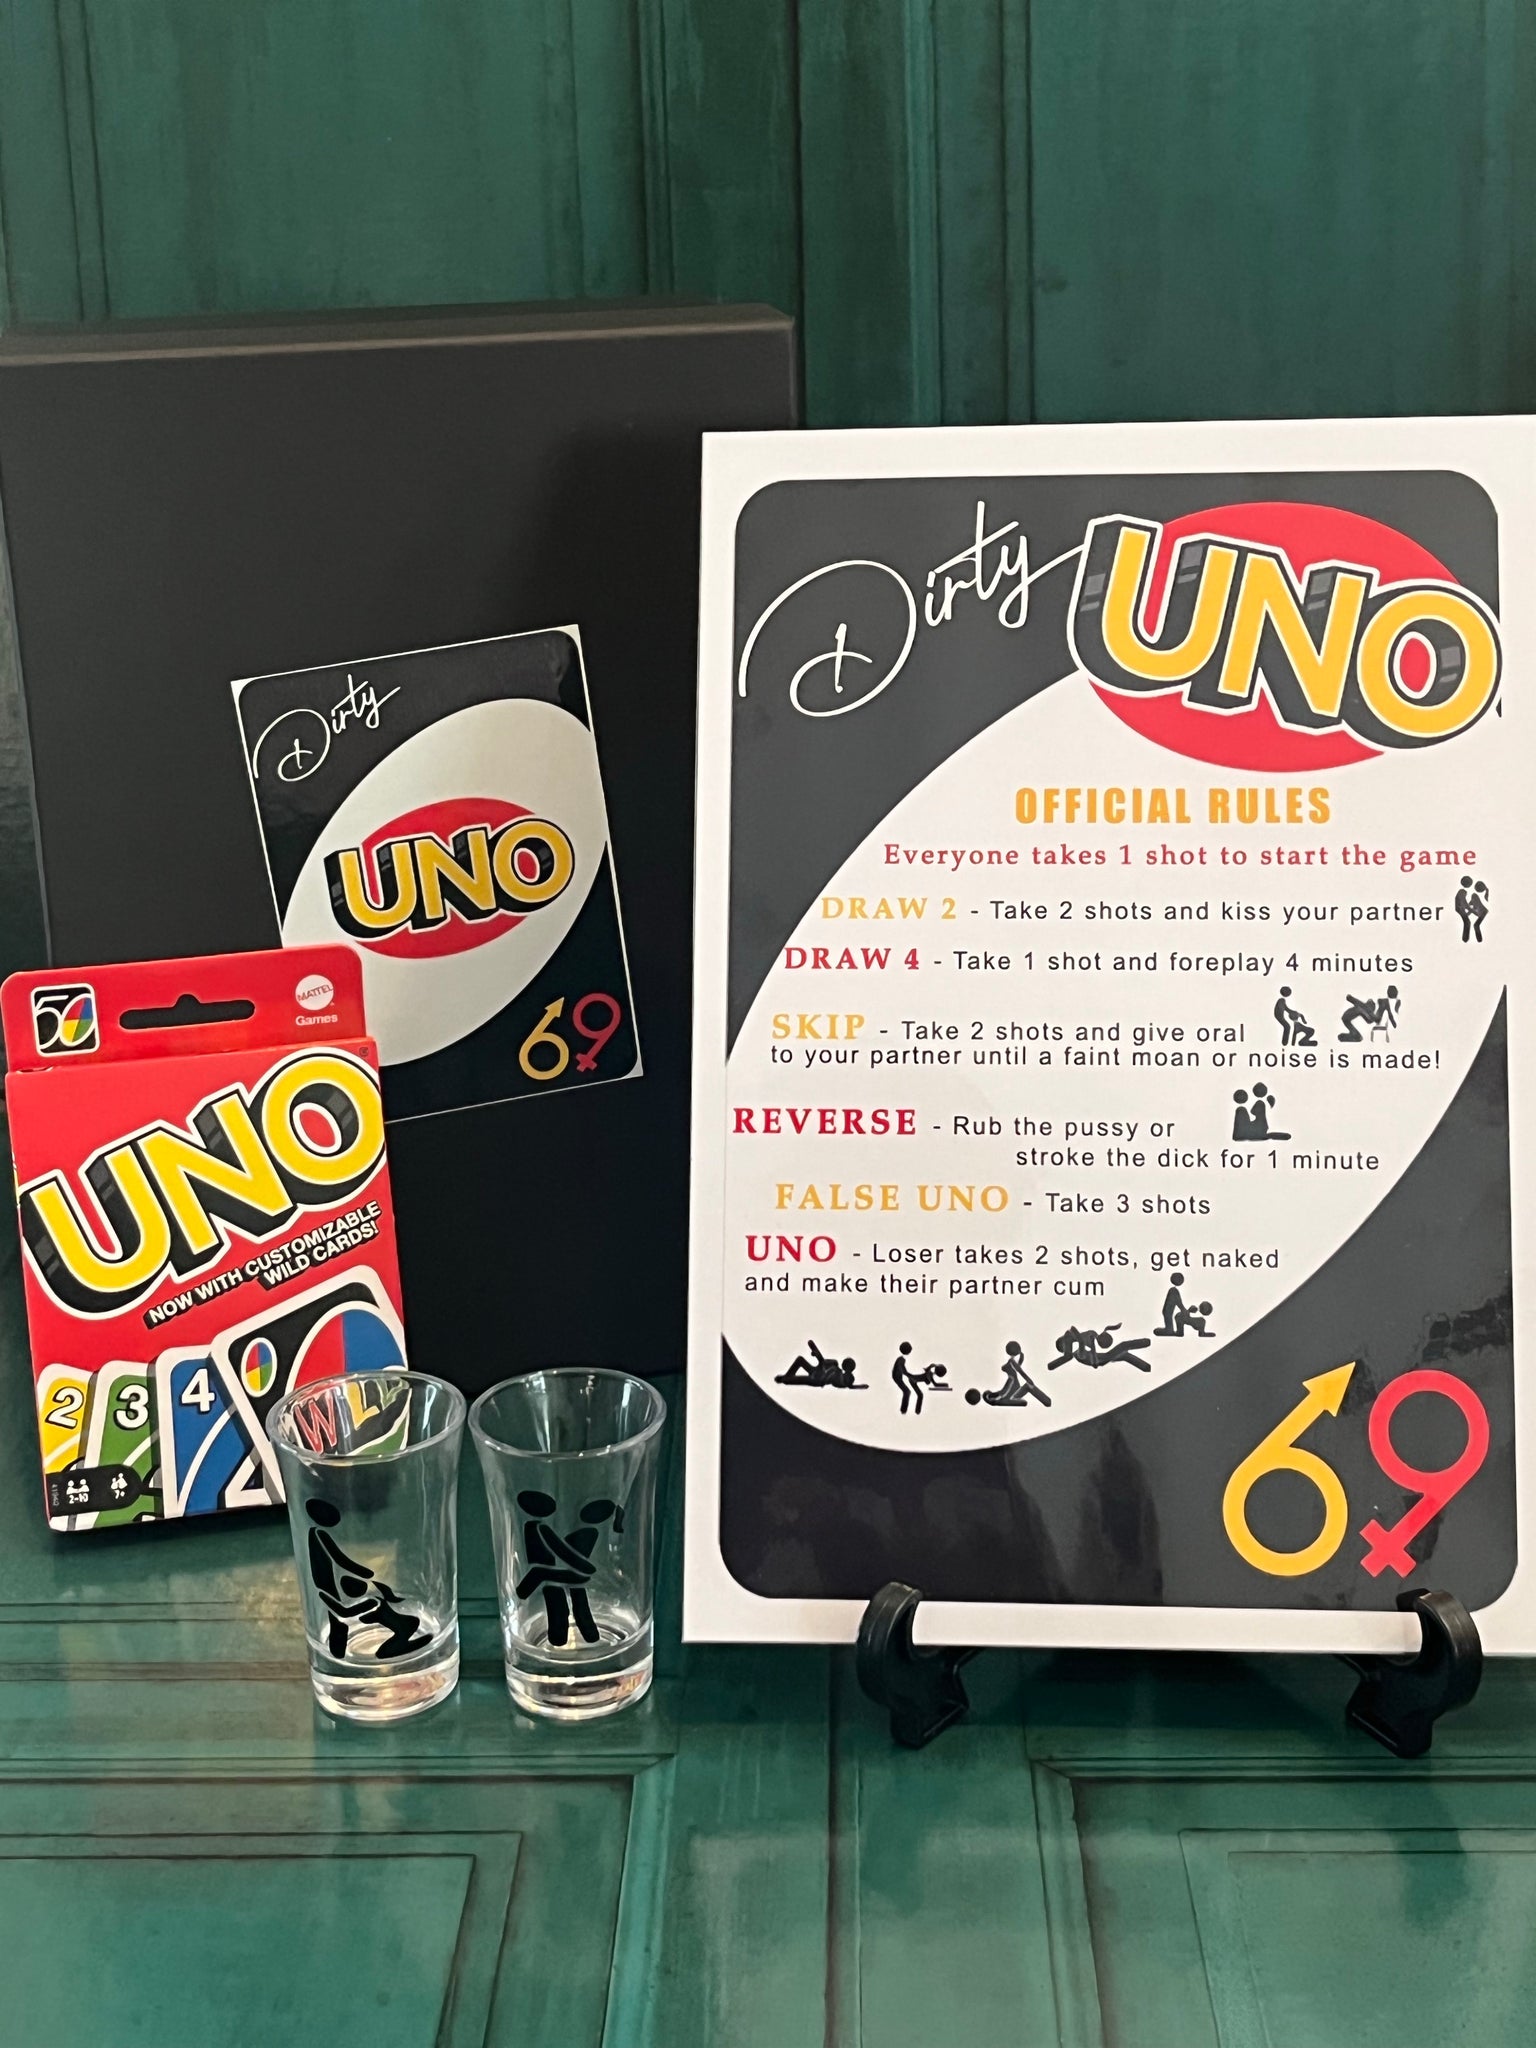 Uno House Rules Cheat Sheet by Lipsum - Download free from Cheatography -  : Cheat Sheets For Every Occasion